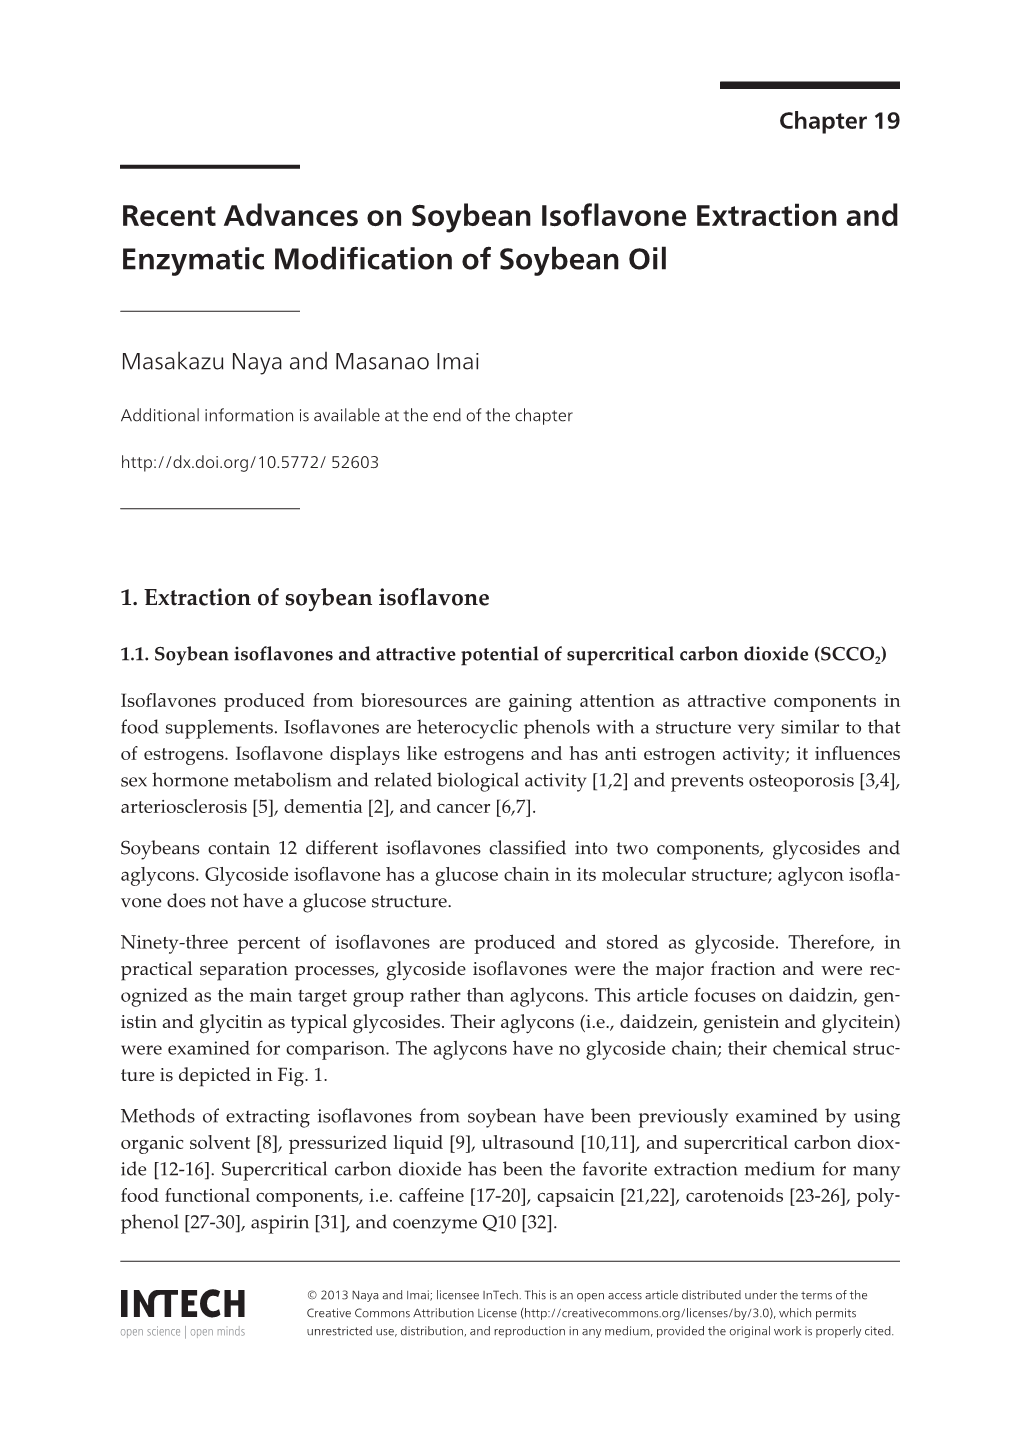 Recent Advances on Soybean Isoflavone Extraction and Enzymatic Modification of Soybean Oil